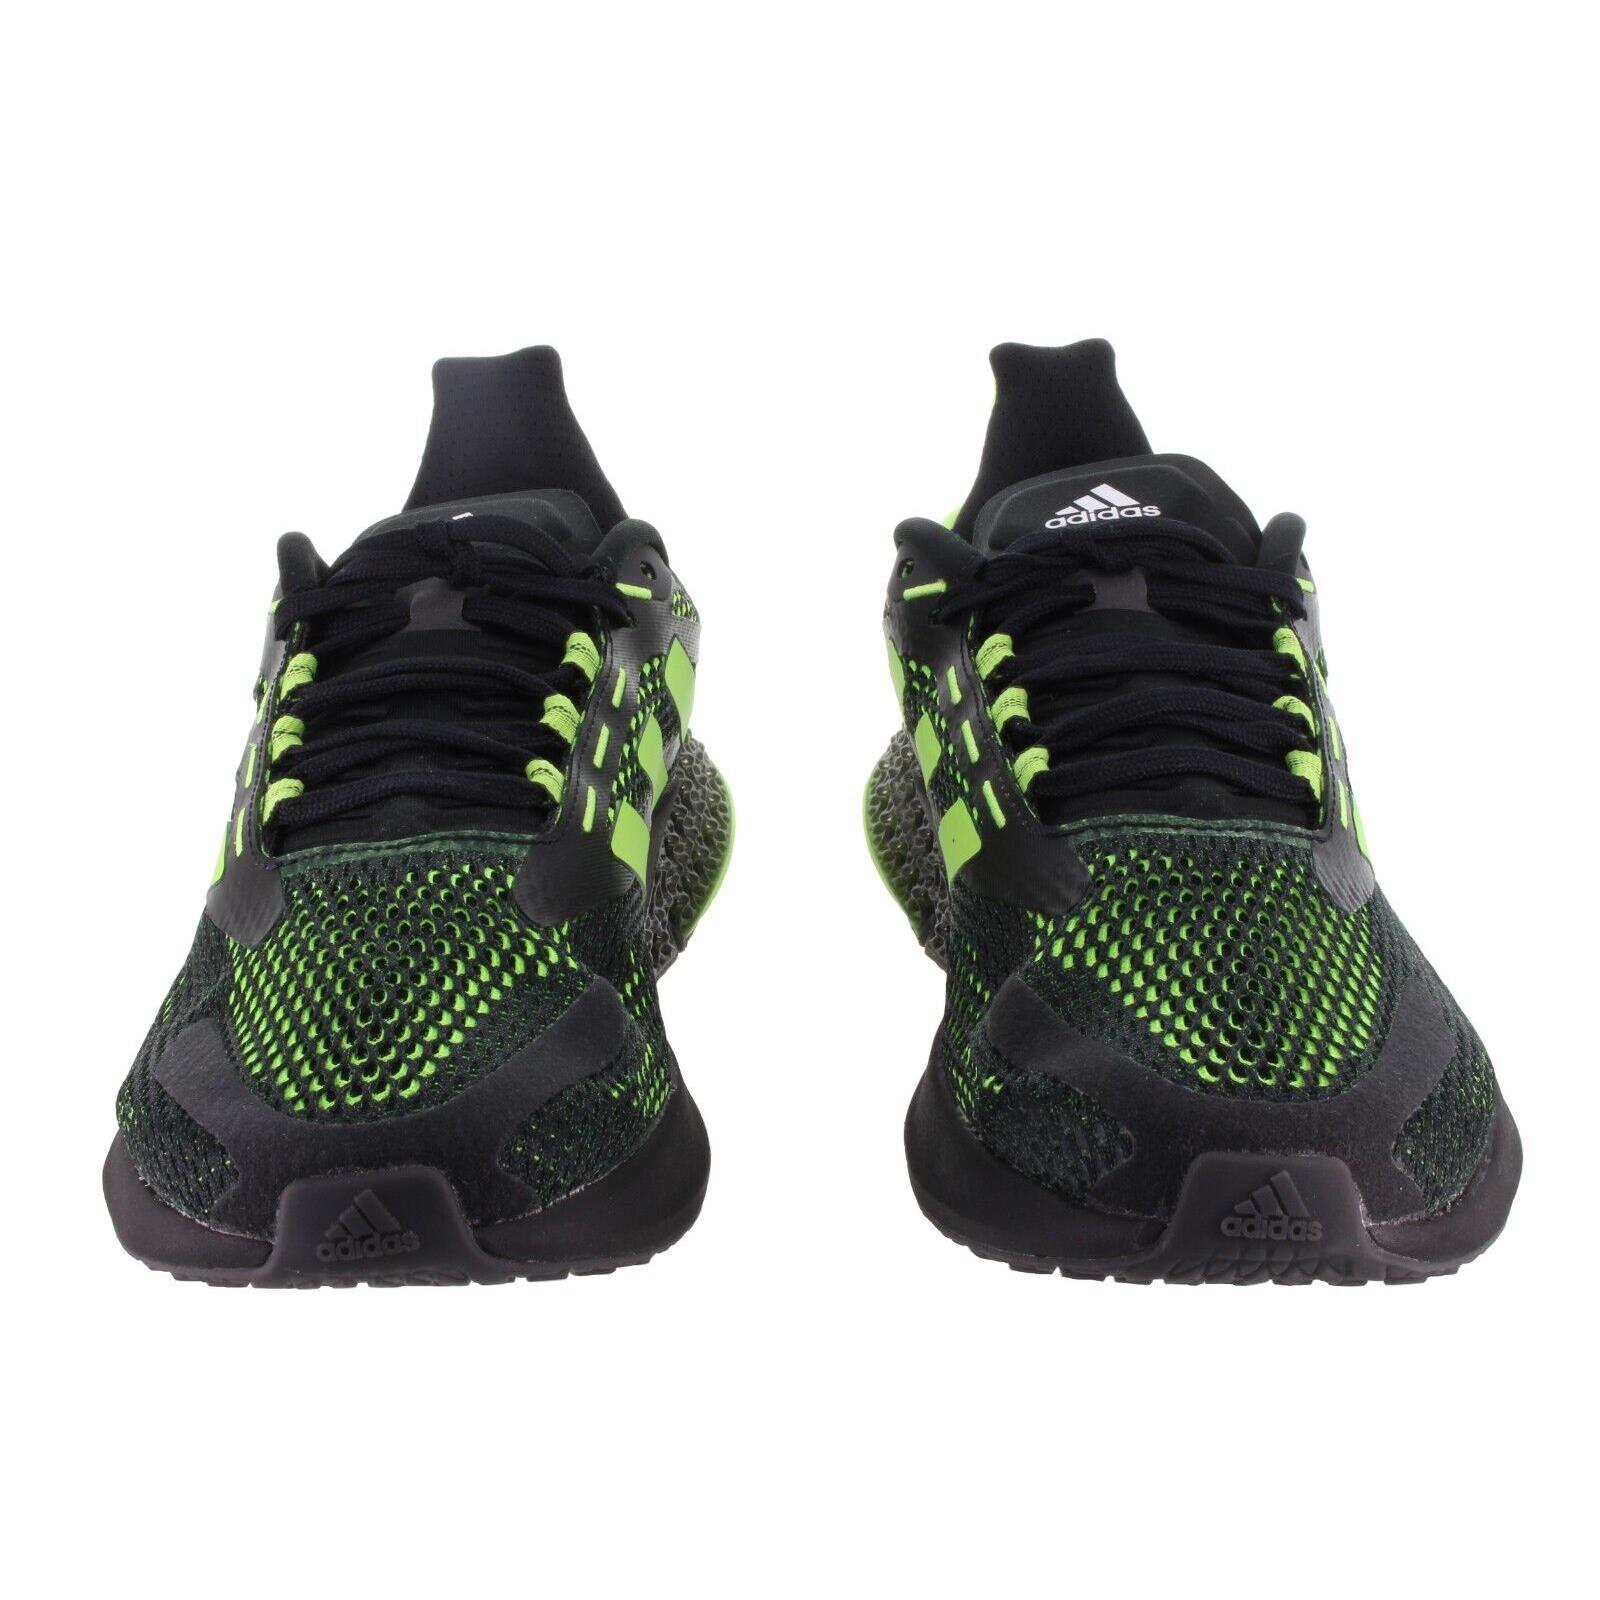 Adidas shoes FWD Pulse - Core Black, Signal Green, Carbon 1